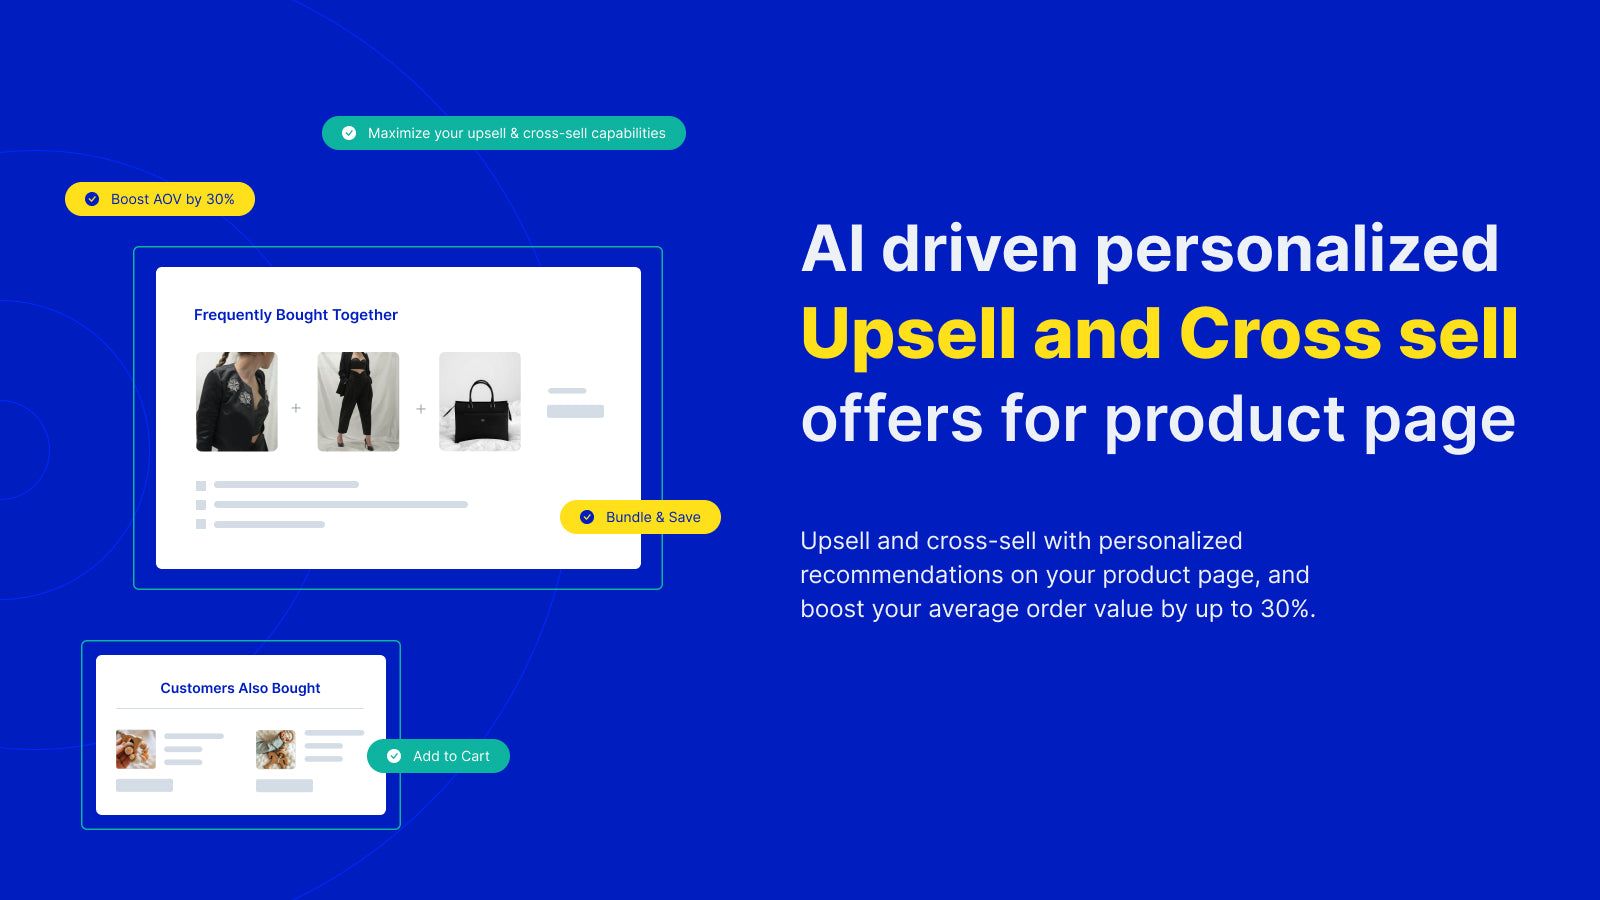 AI driven personalized upsell & cross-sell for product page.